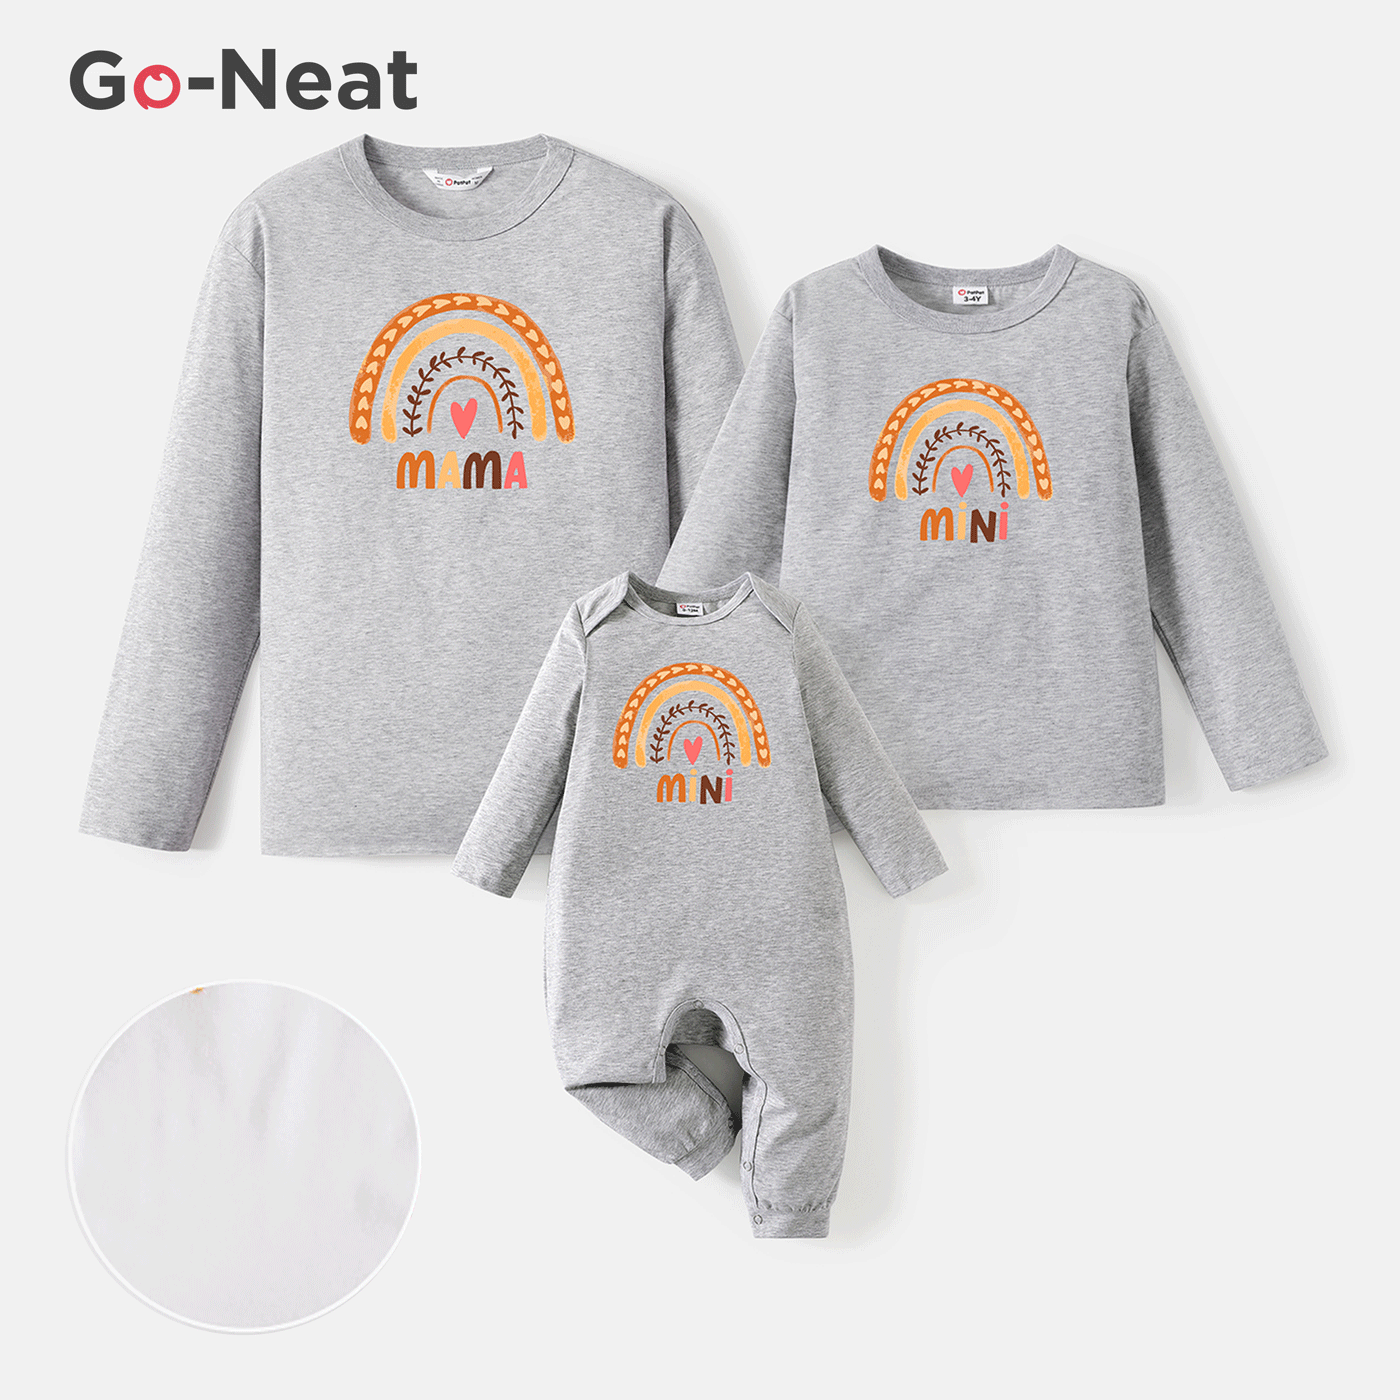 Go-Neat Water Repellent and Stain Resistant Mommy and Me Rainbow Print Long-sleeve Tee Light Grey